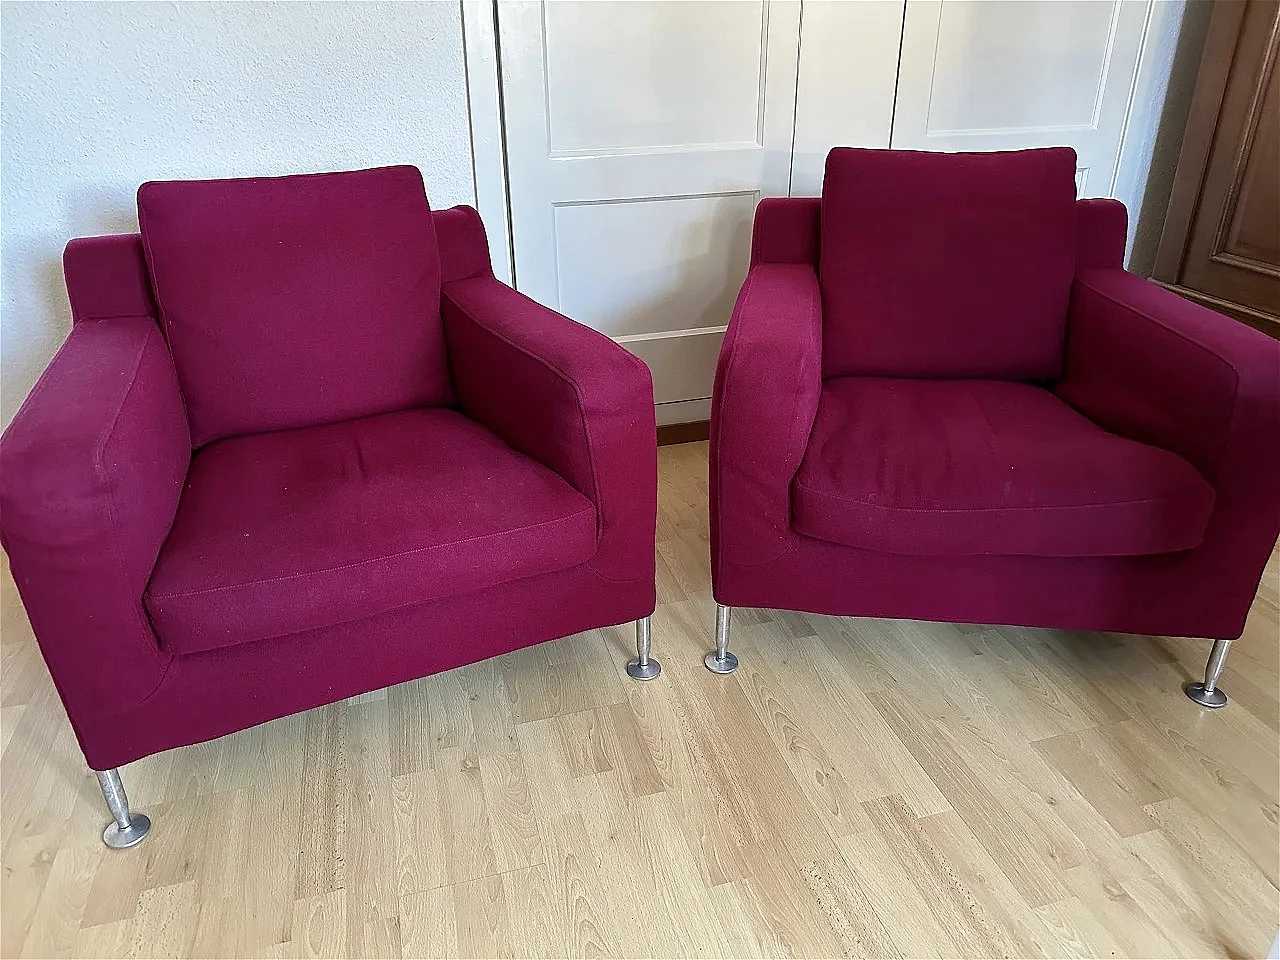 Pair of Harry armchairs in Maxalto wool by A. Citterio for B&B Italia 1